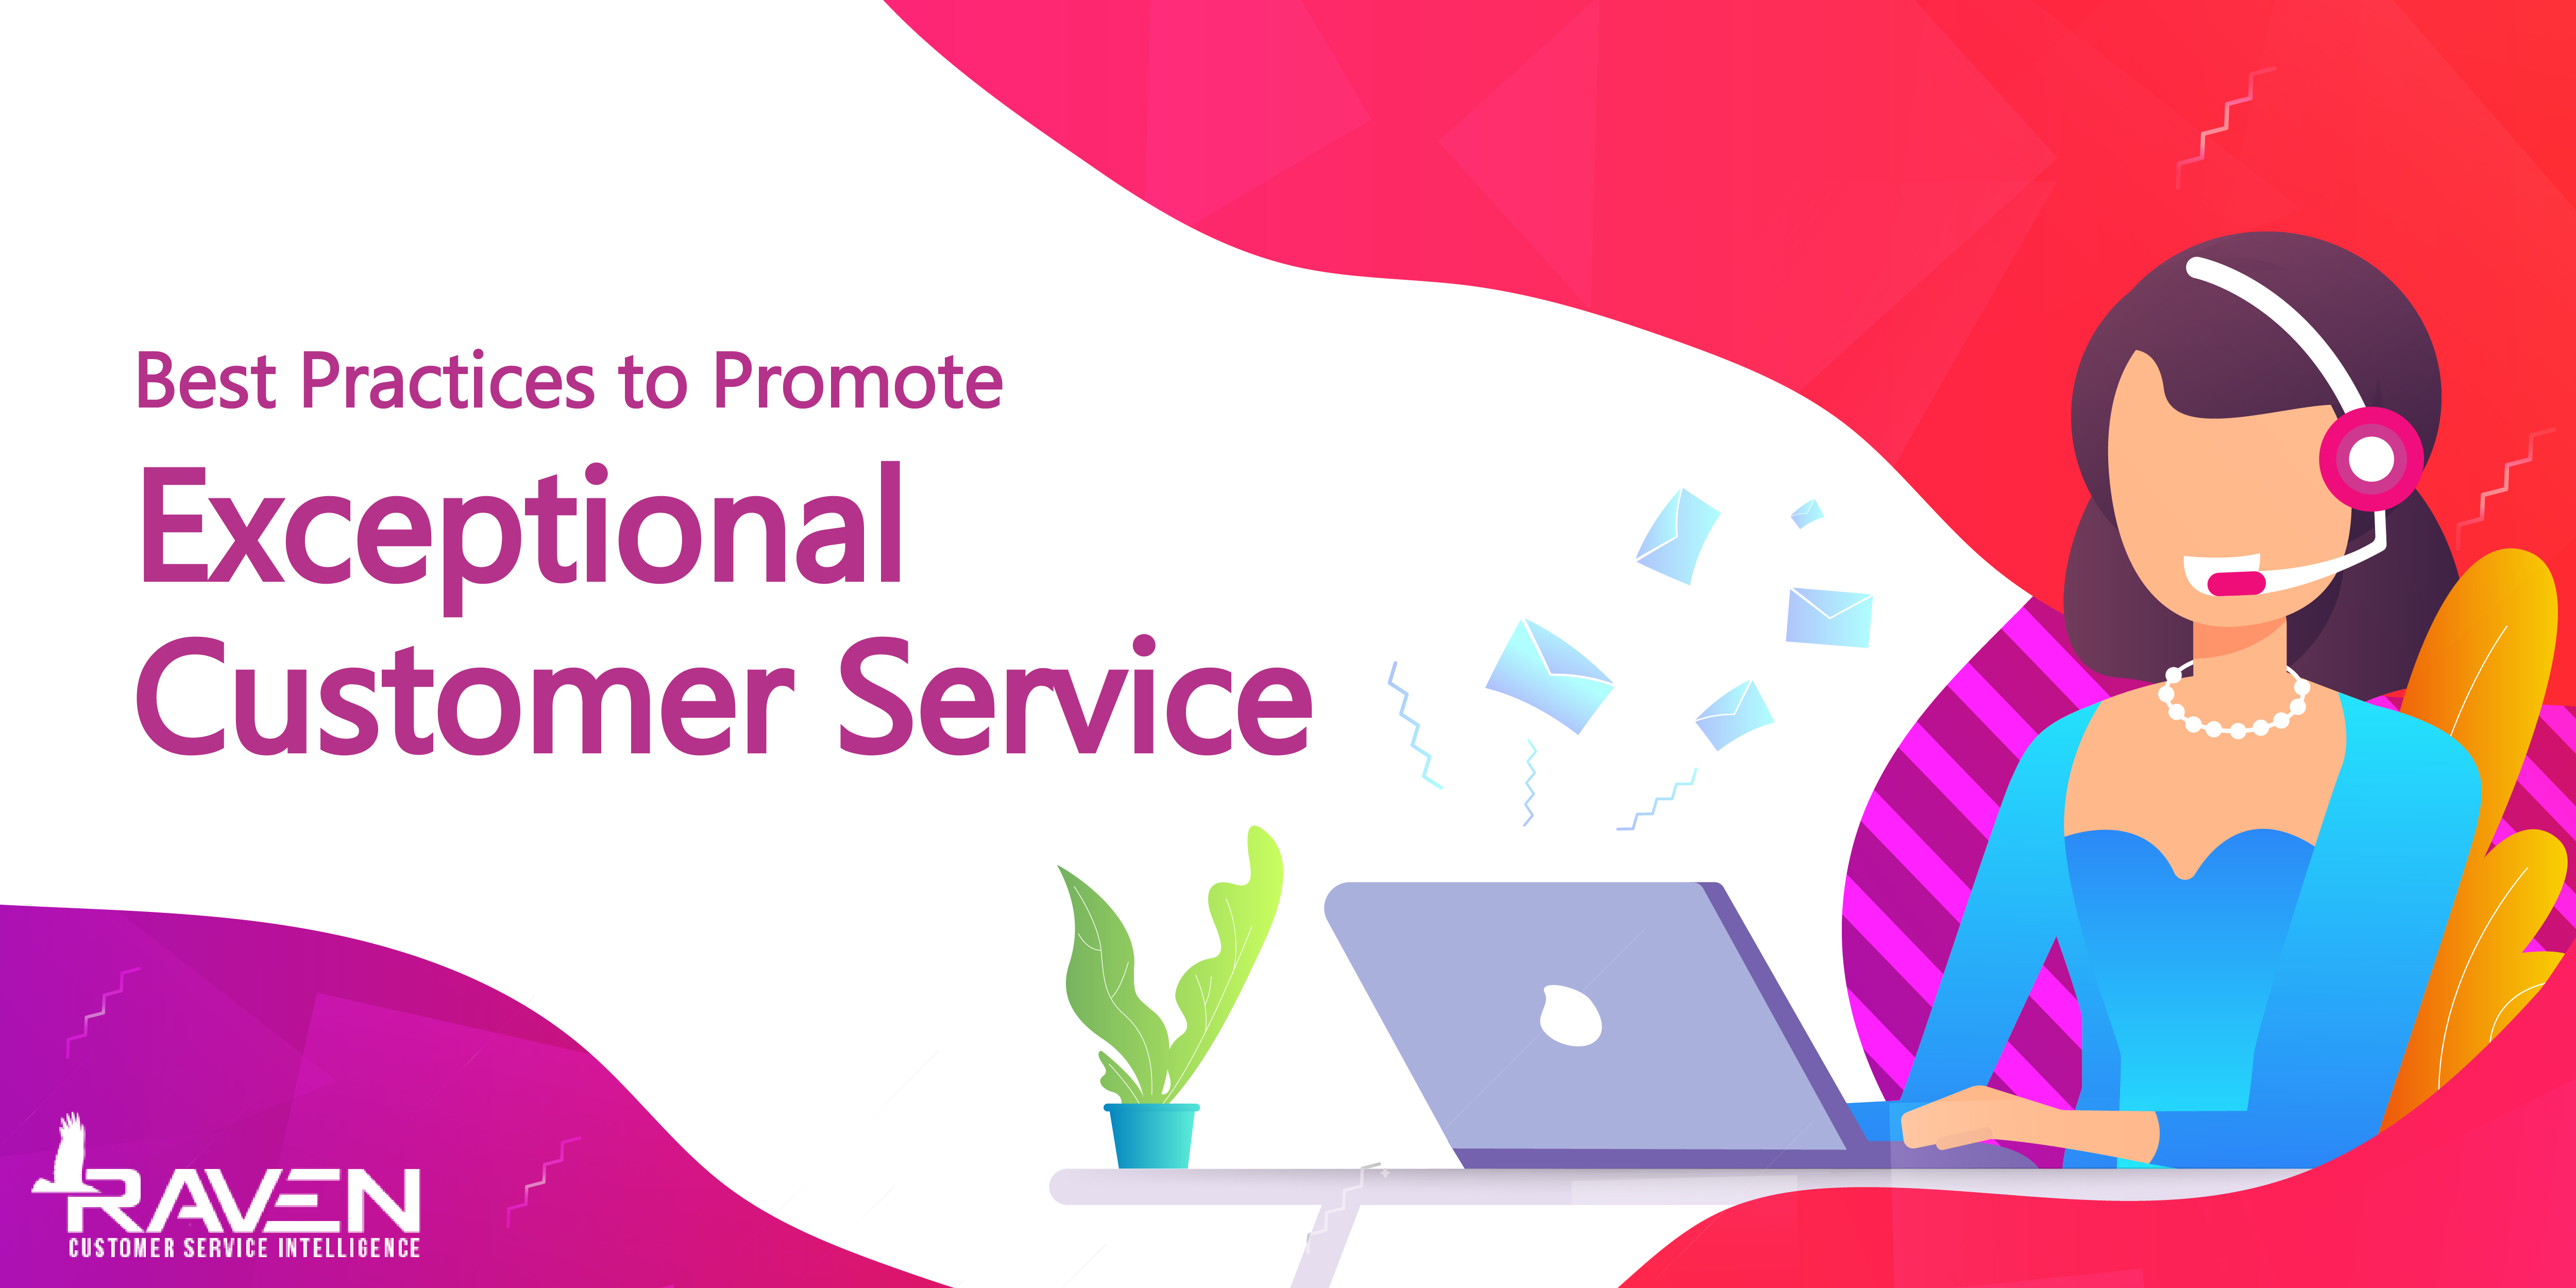 blog7 - Best Practices to Promote Exceptional Customer Service